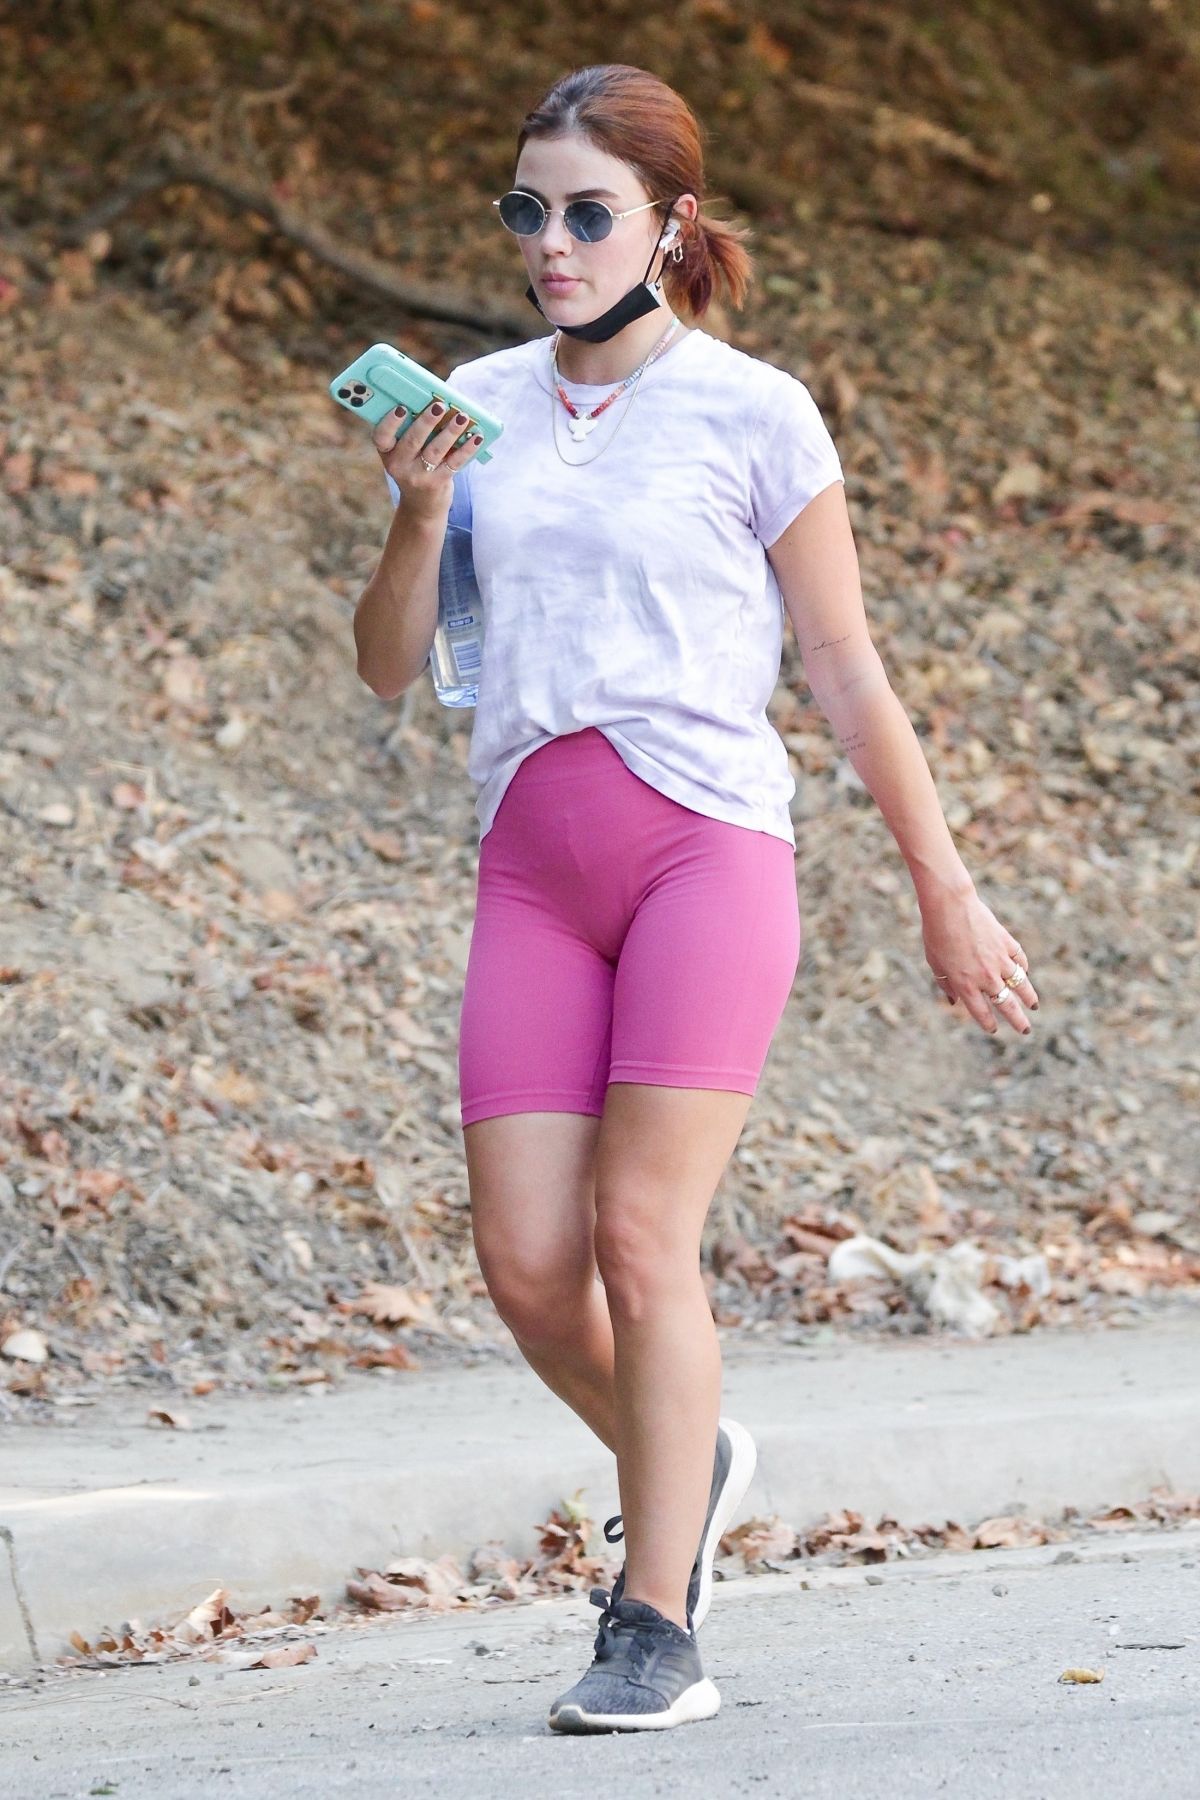 LUCY HALE Out Hiking in Los Angeles 09/28/2020 – HawtCelebs